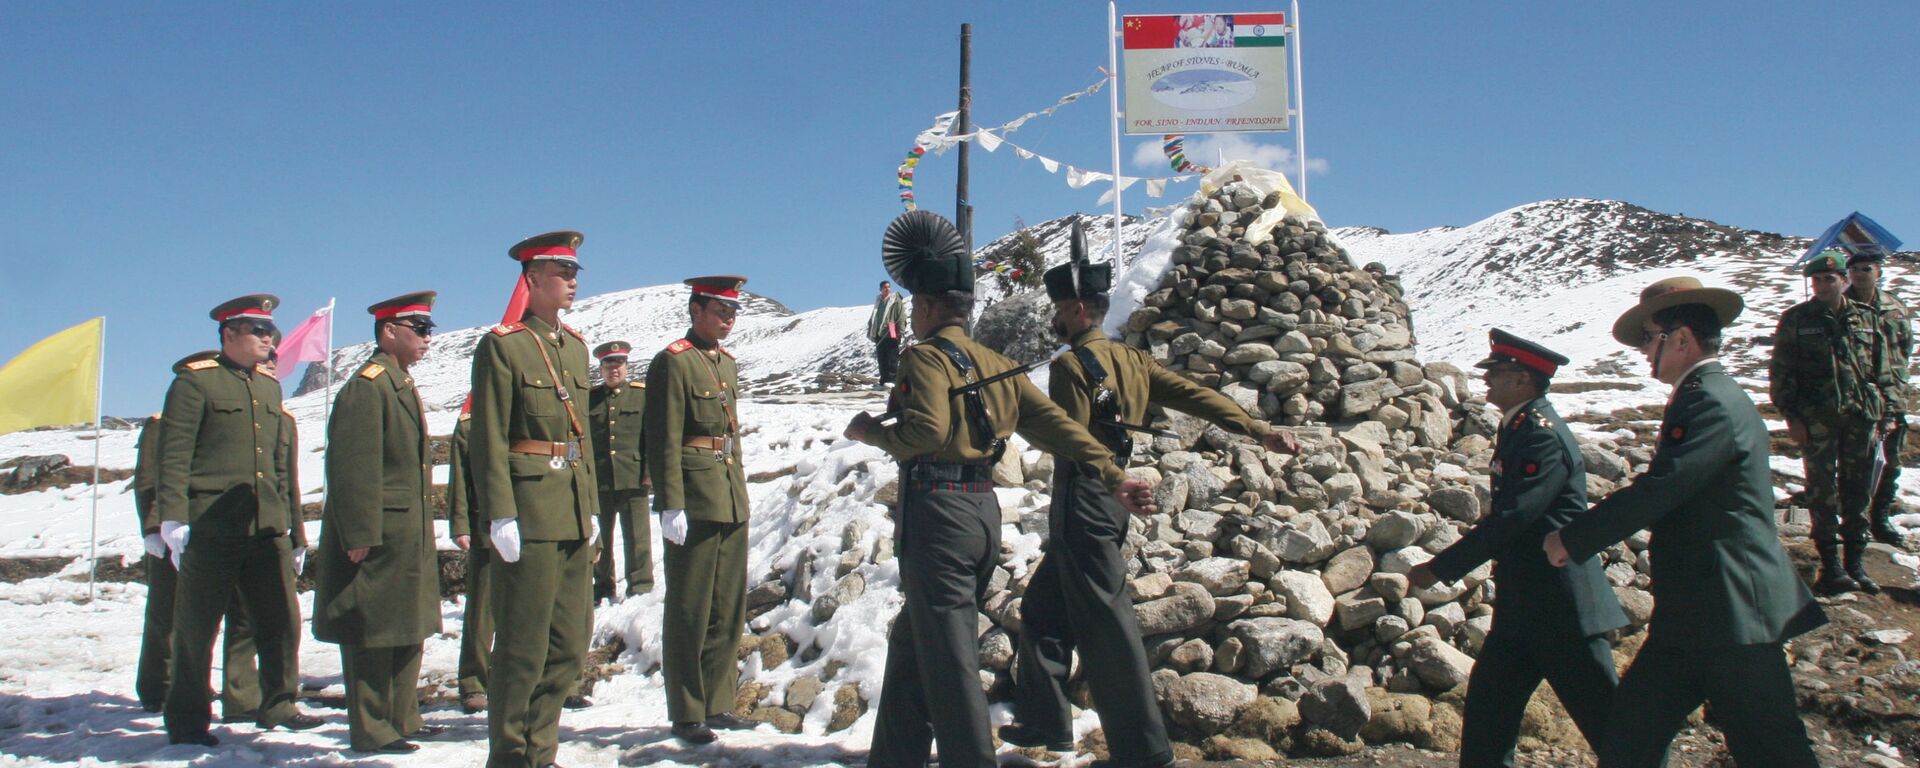 A delegation of the Indian Army, right, marches to meet the delegation of the Chinese army, left, at a Border Personnel Meeting (BPM) on the Chinese side of the Line of Actual Control at Bumla, Indo-China Border, 30 October 2006 - Sputnik International, 1920, 03.03.2021